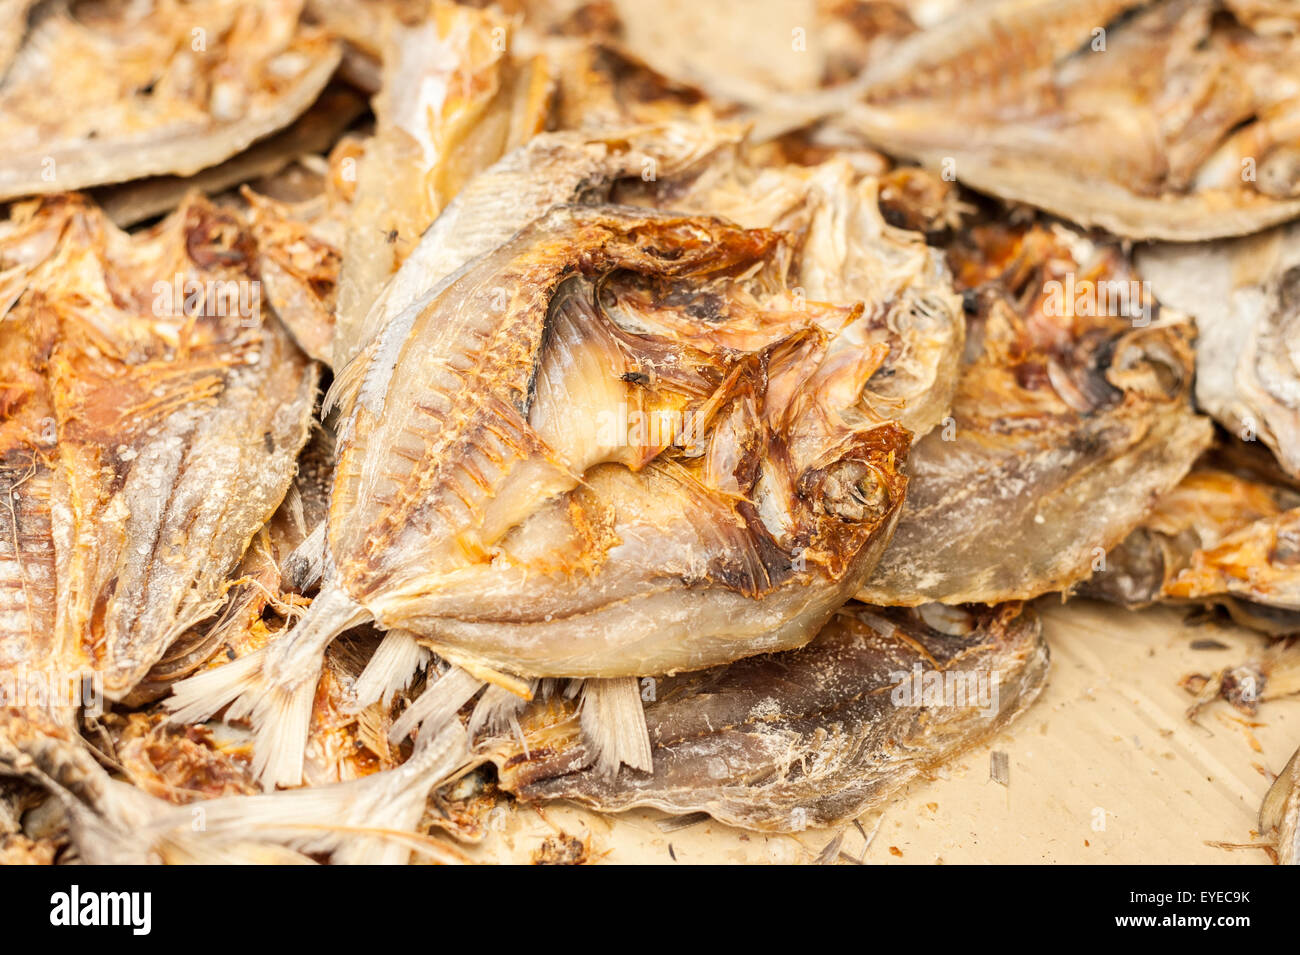 Dried fish, Salted fish in countryside market Stock Photo